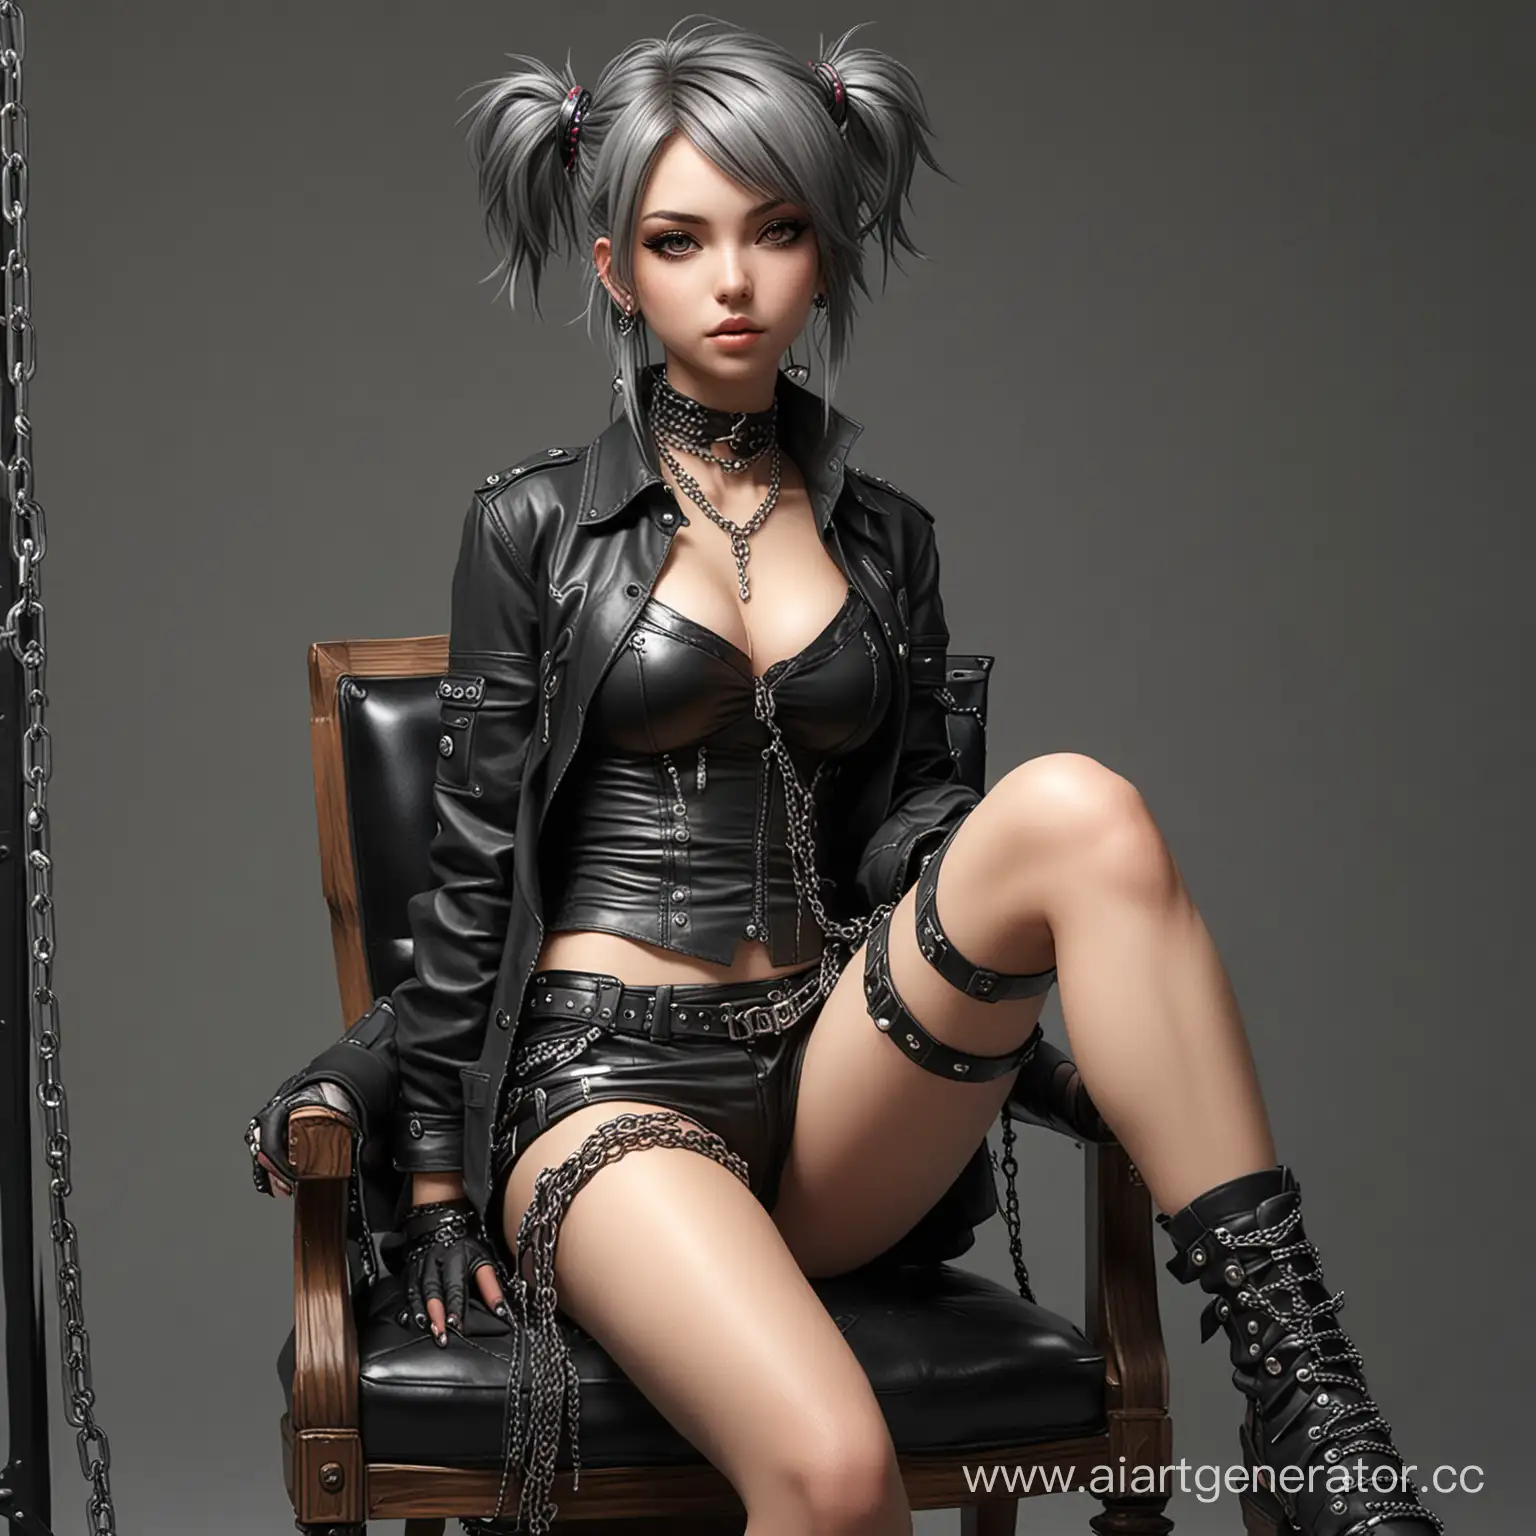 Anime punk girl is sitting on a chair, leg over leg, pompous face, detailed clothes and body, chains. The choker